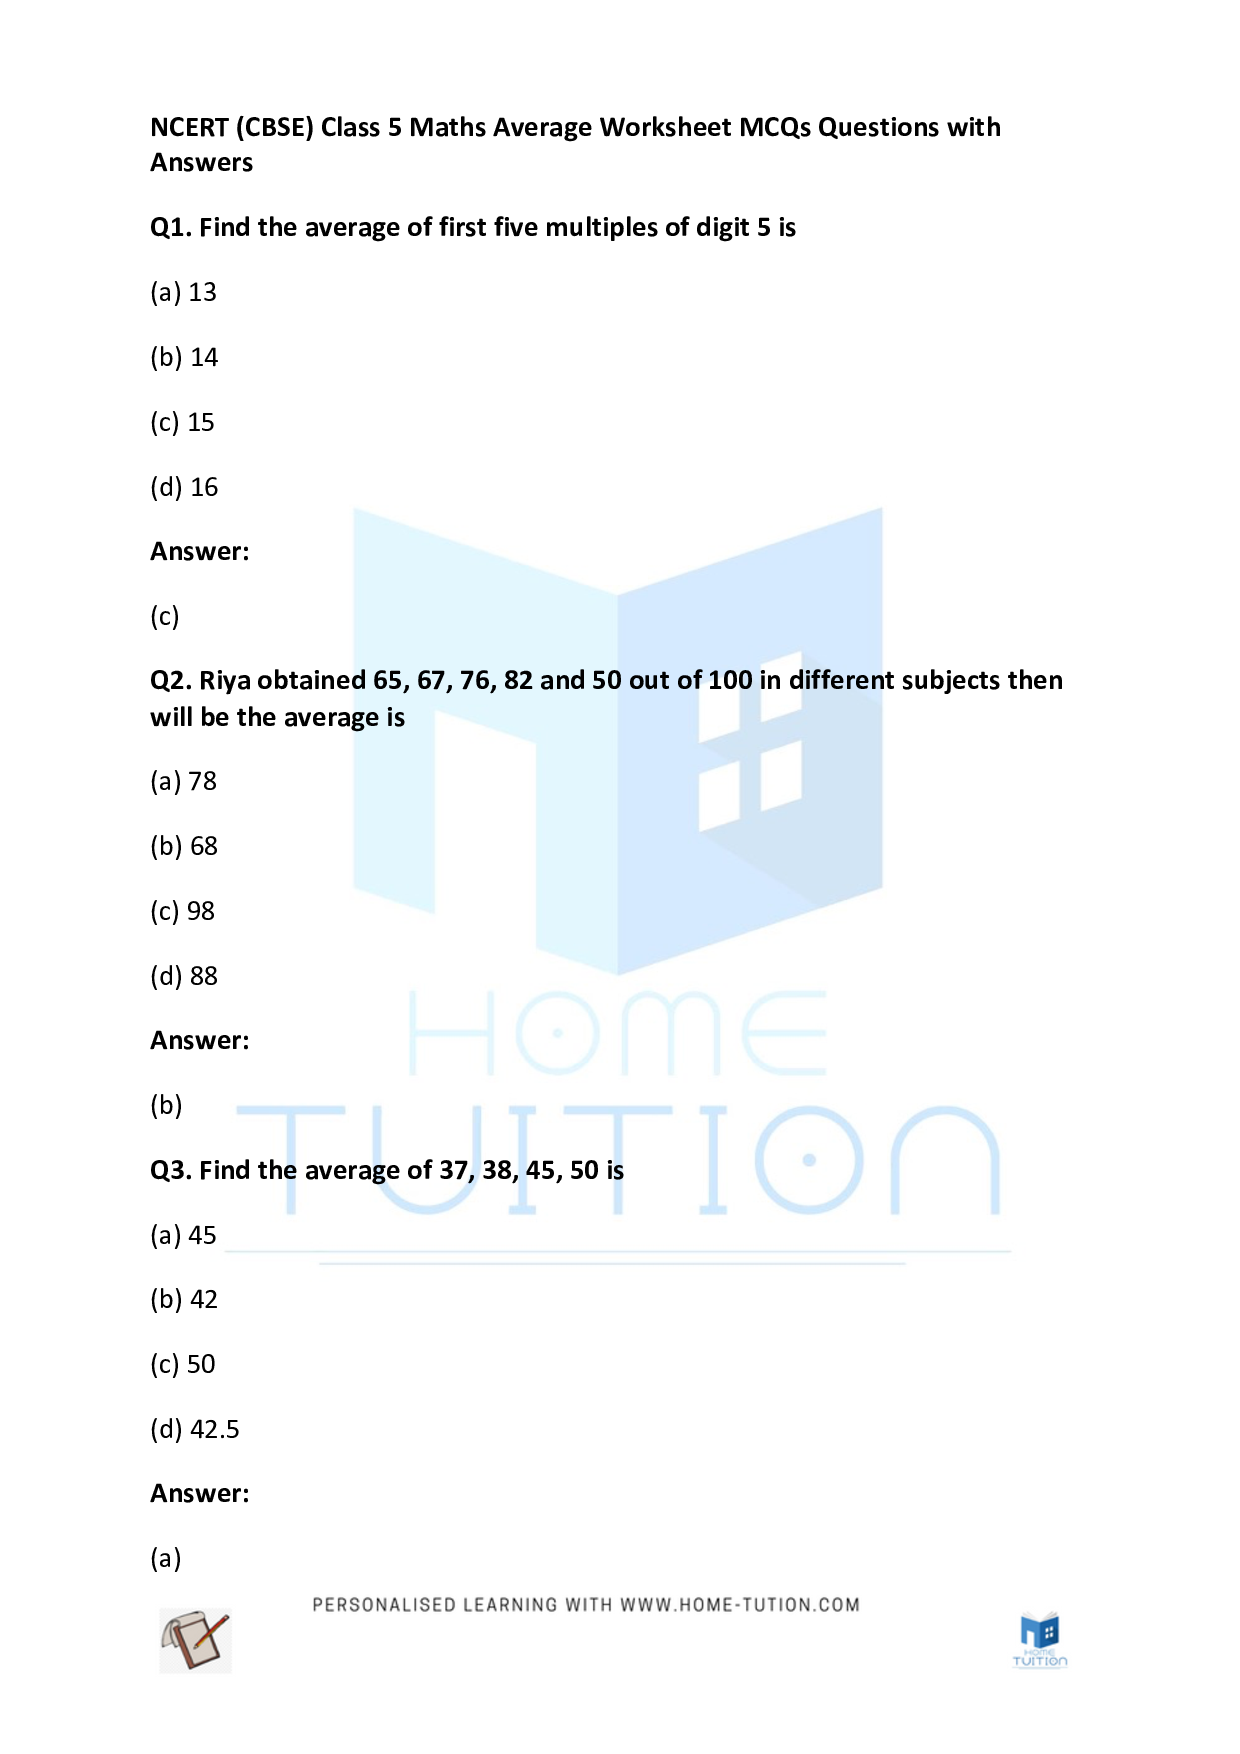 CBSE Class 5 Maths Average Worksheet with Answers PDF 